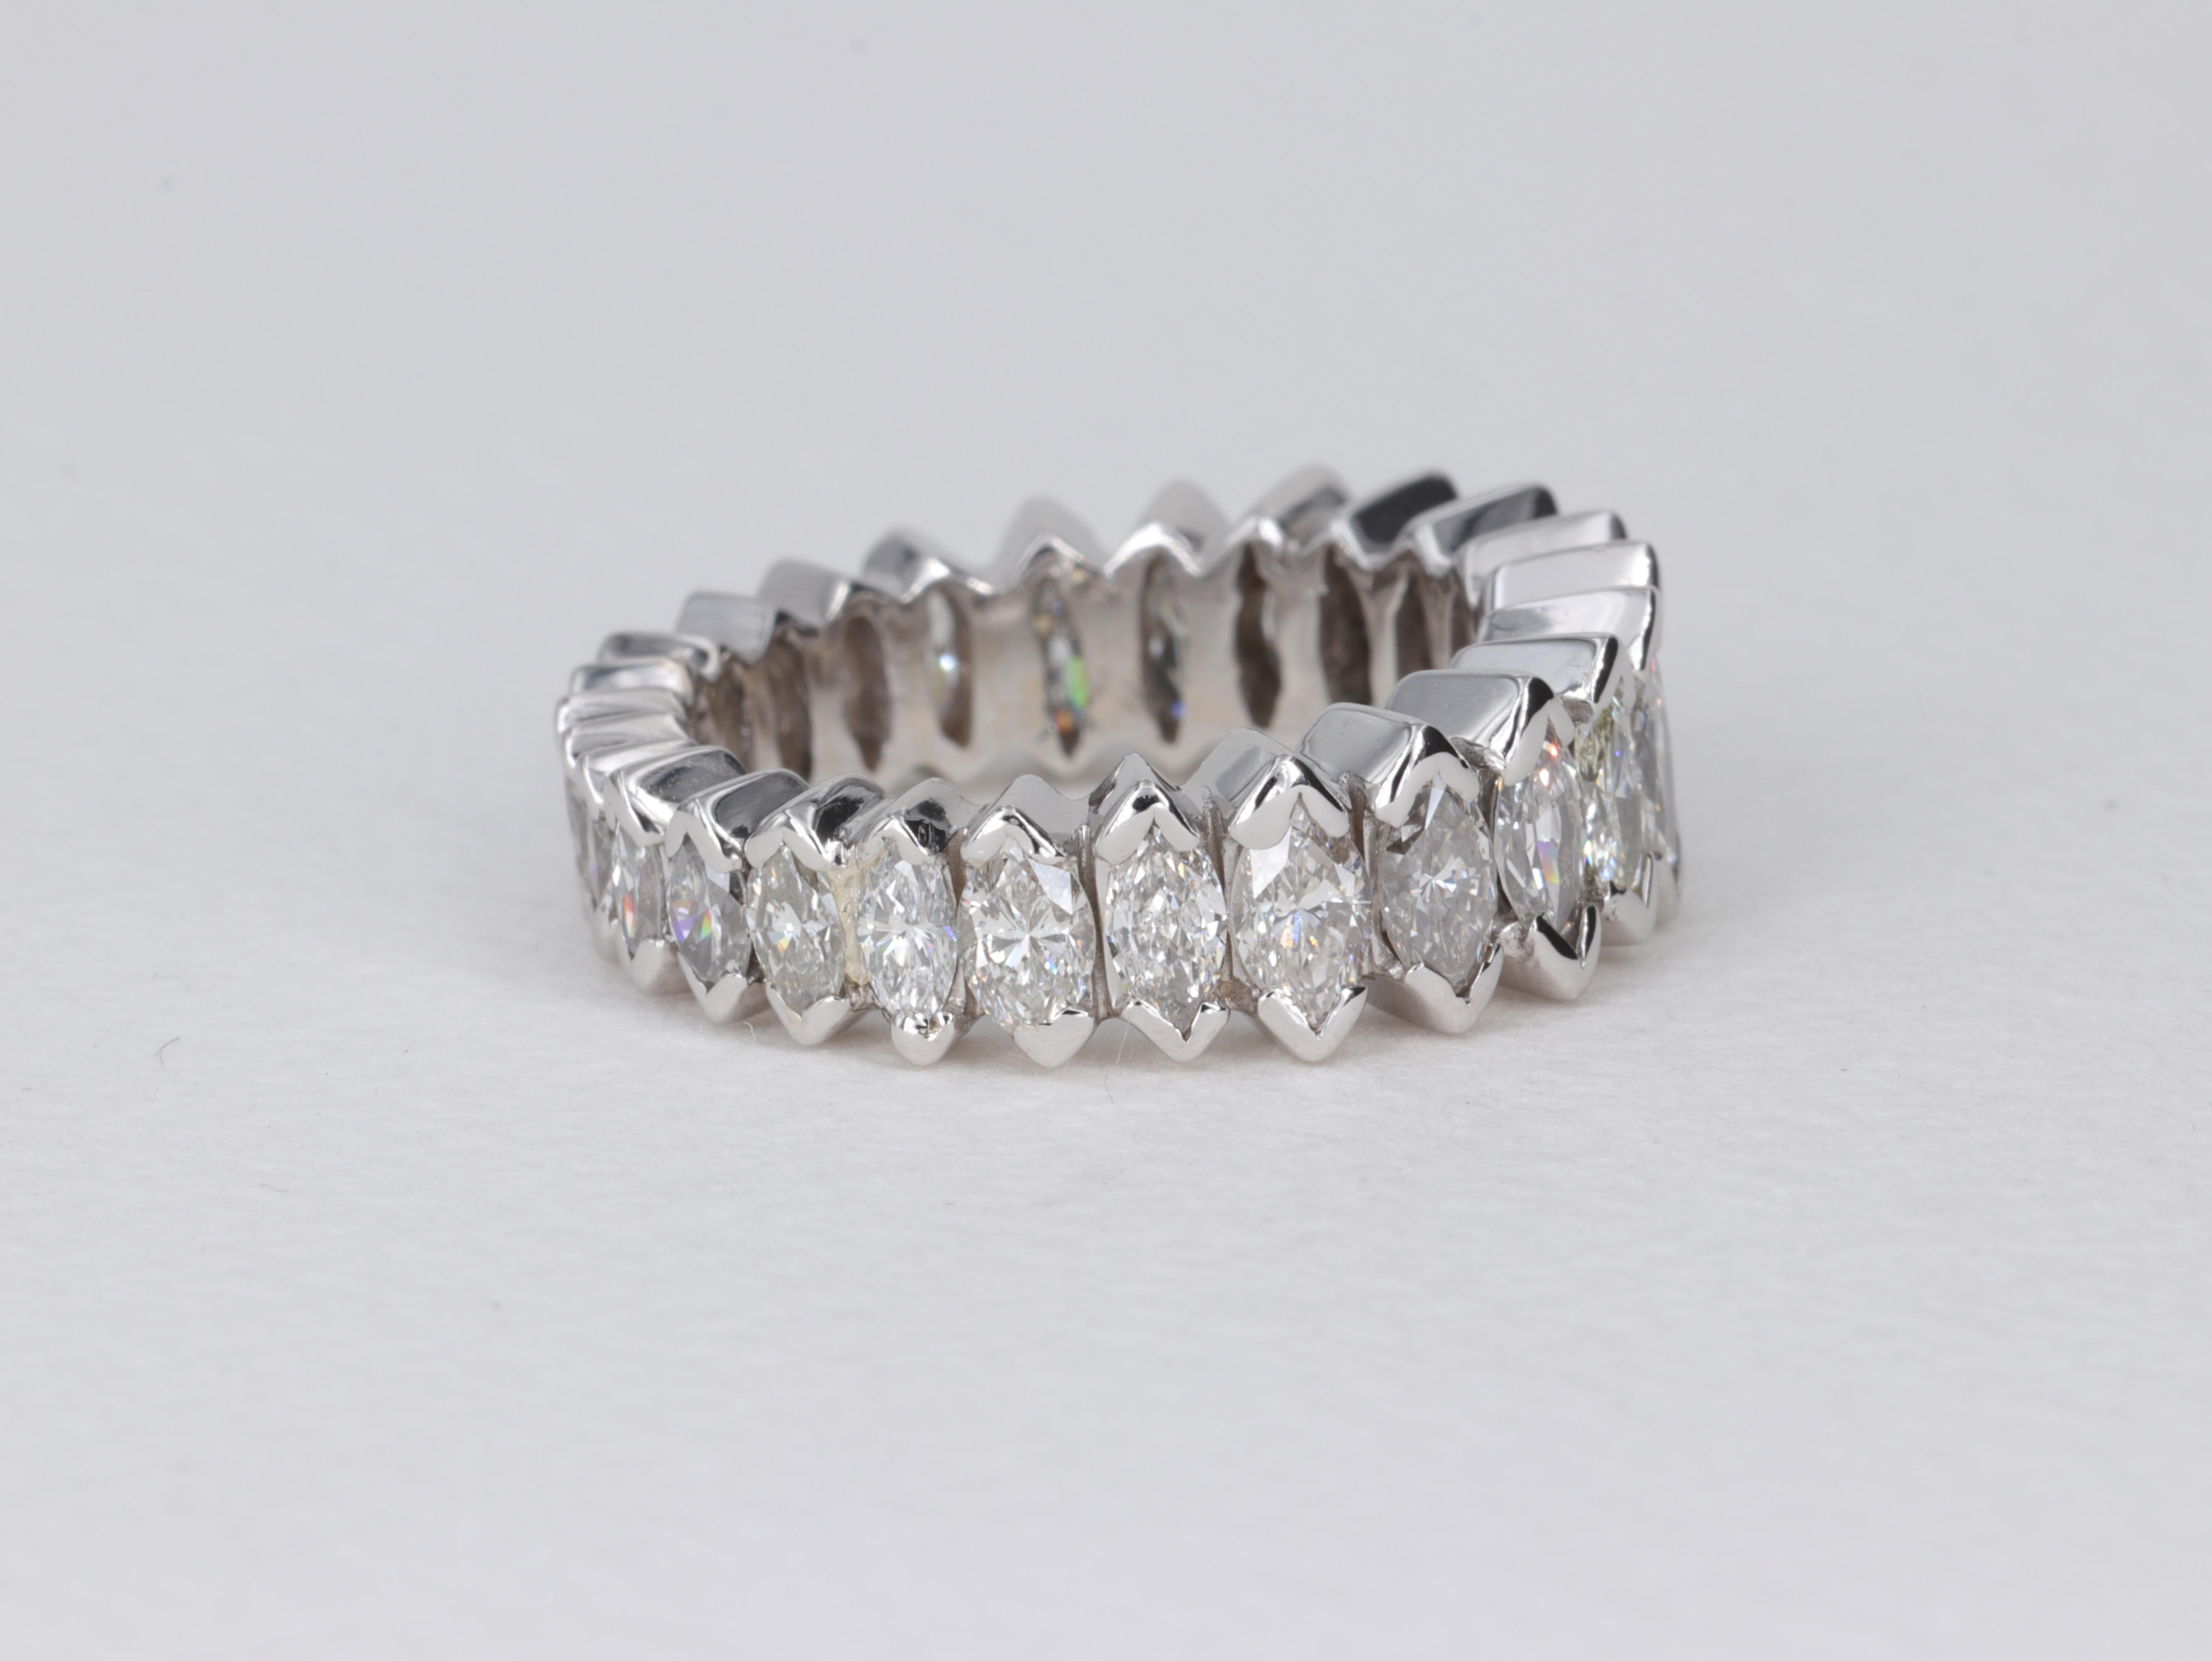 Graduated Marquise Diamond Eternity Band

Set with approximately 3 Carats of Marquise Cut Diamonds in 14 Karat White Gold

The diamonds range in color from F-J and in clarity from VS-I2.

The band does contain 3 diamonds with minor chips. 

Finger